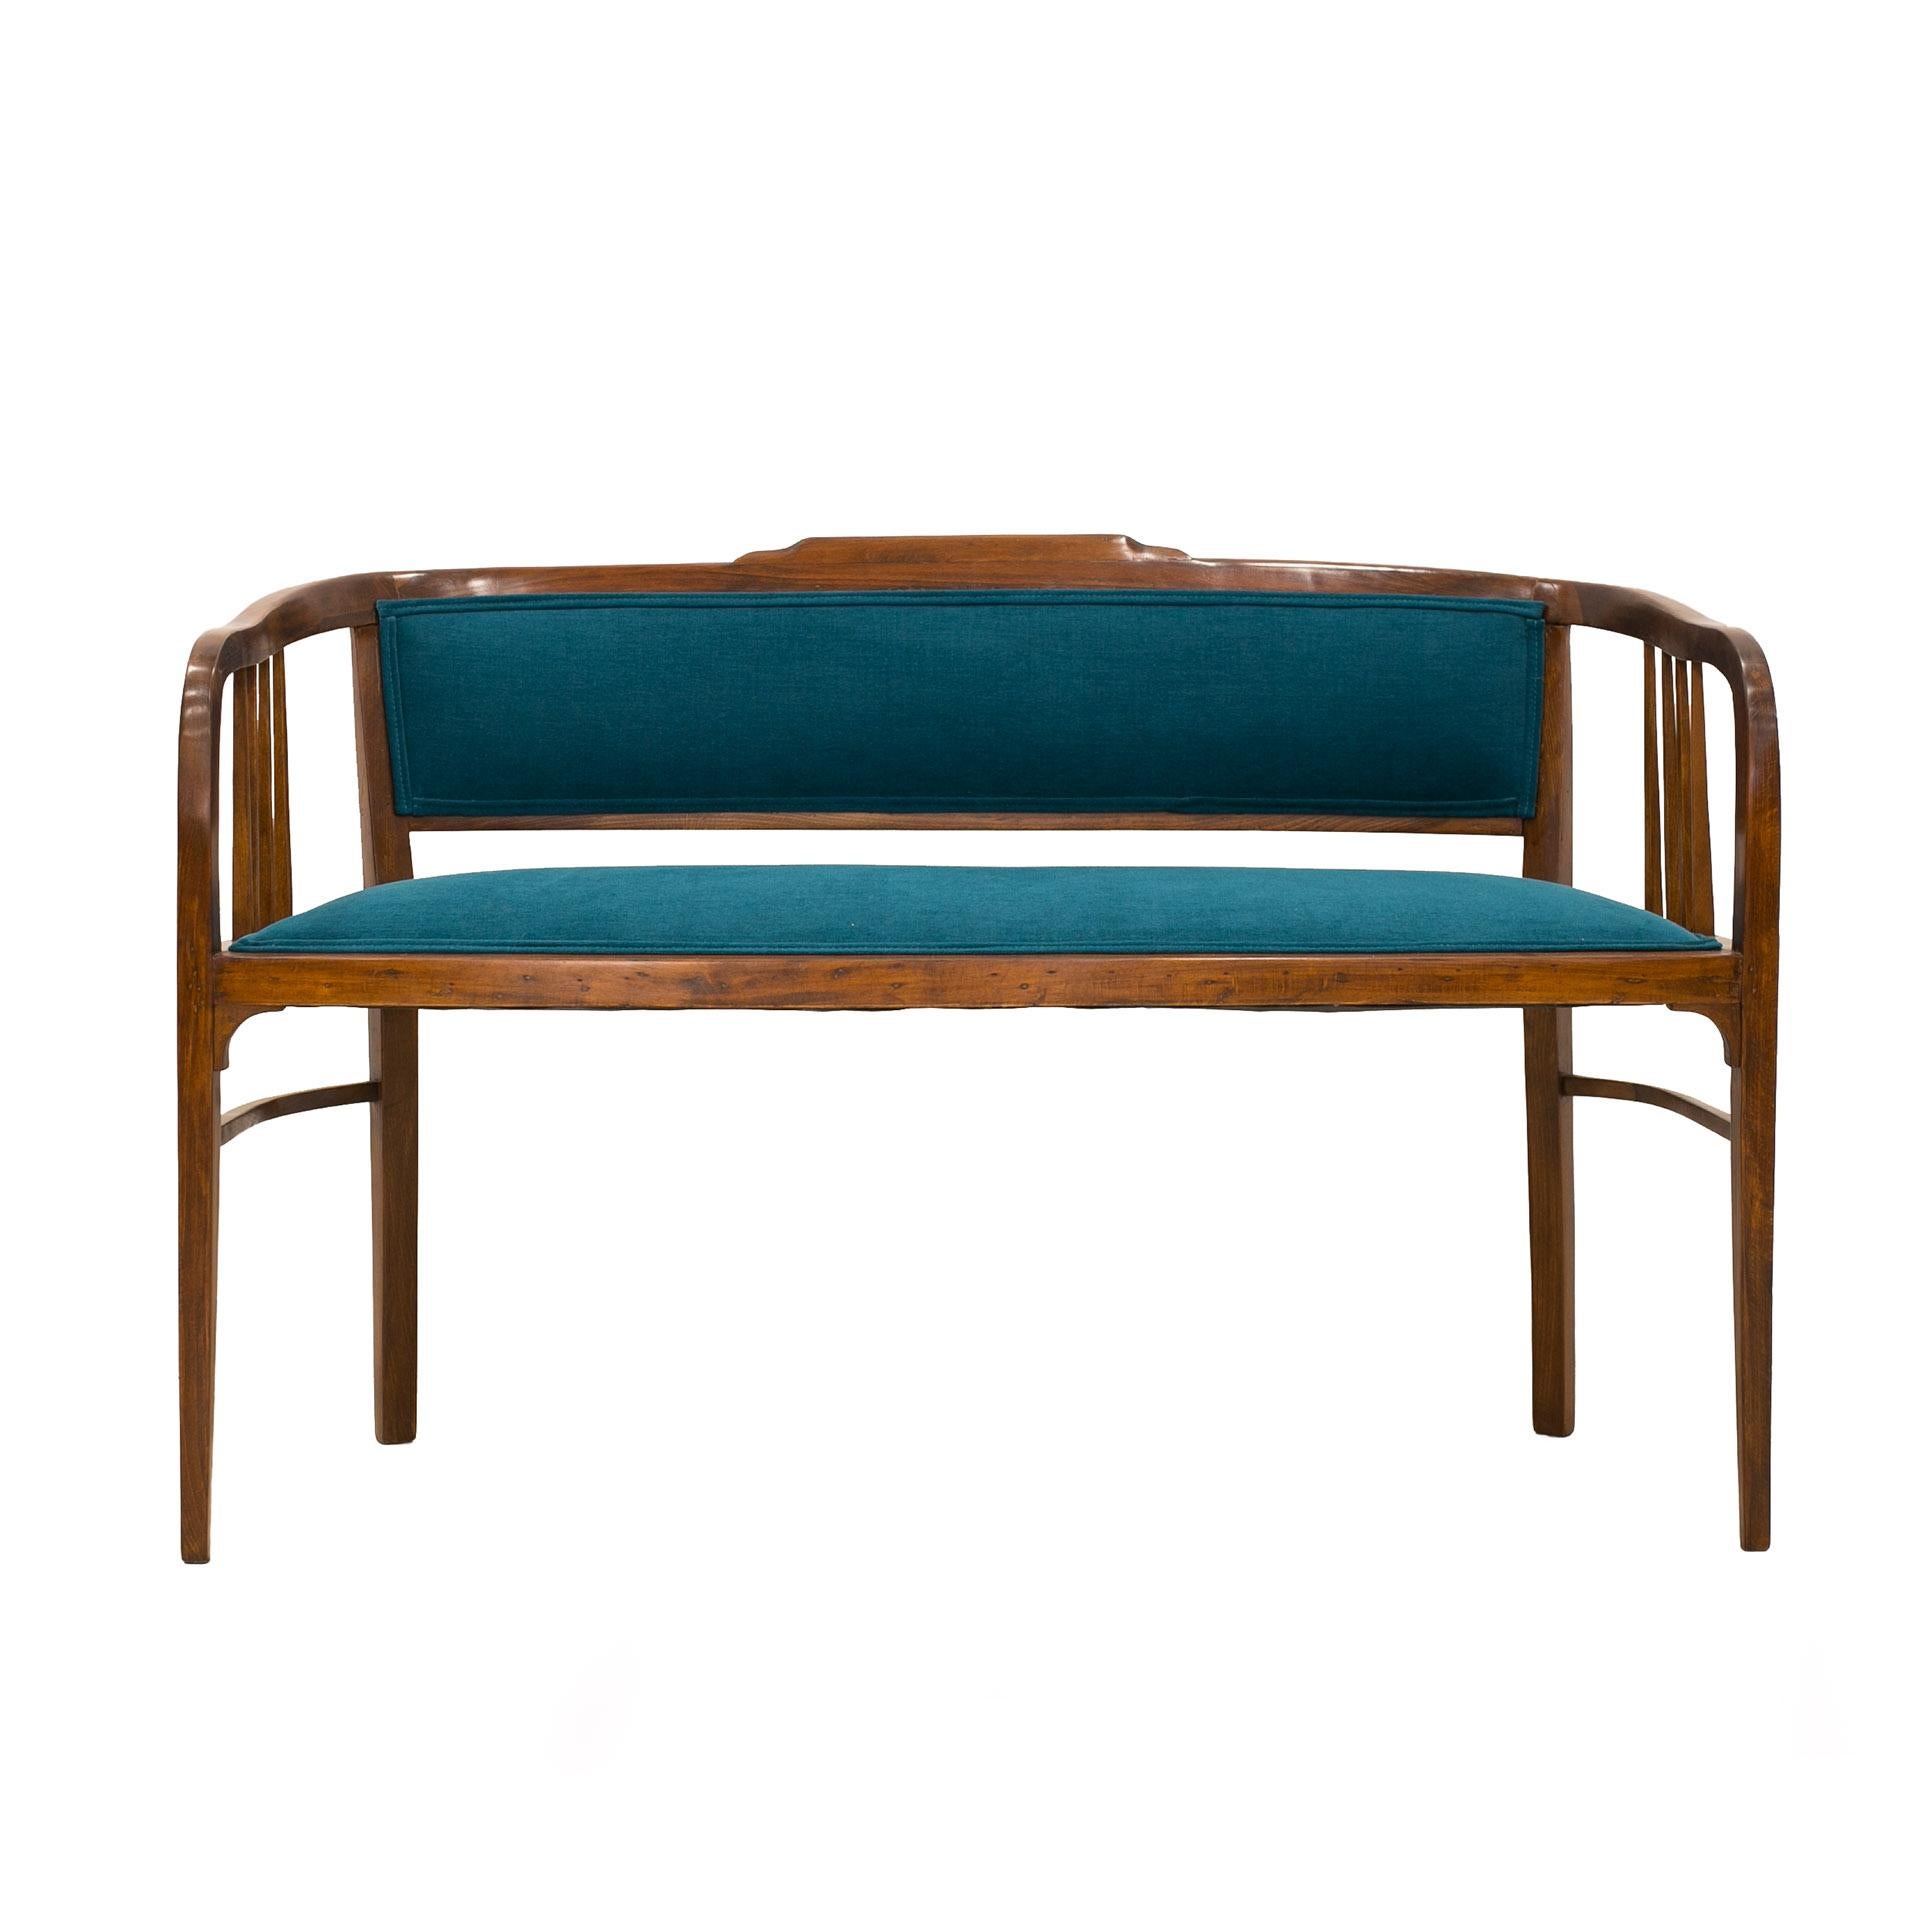 Beautifully restored bench settee from early 20th century from Austria. The bench features reupholstered seat and back in deep blue turquoise fabric. Beech wooden surfaces have been cleaned and finished with high-quality wood oil. Despite seemingly